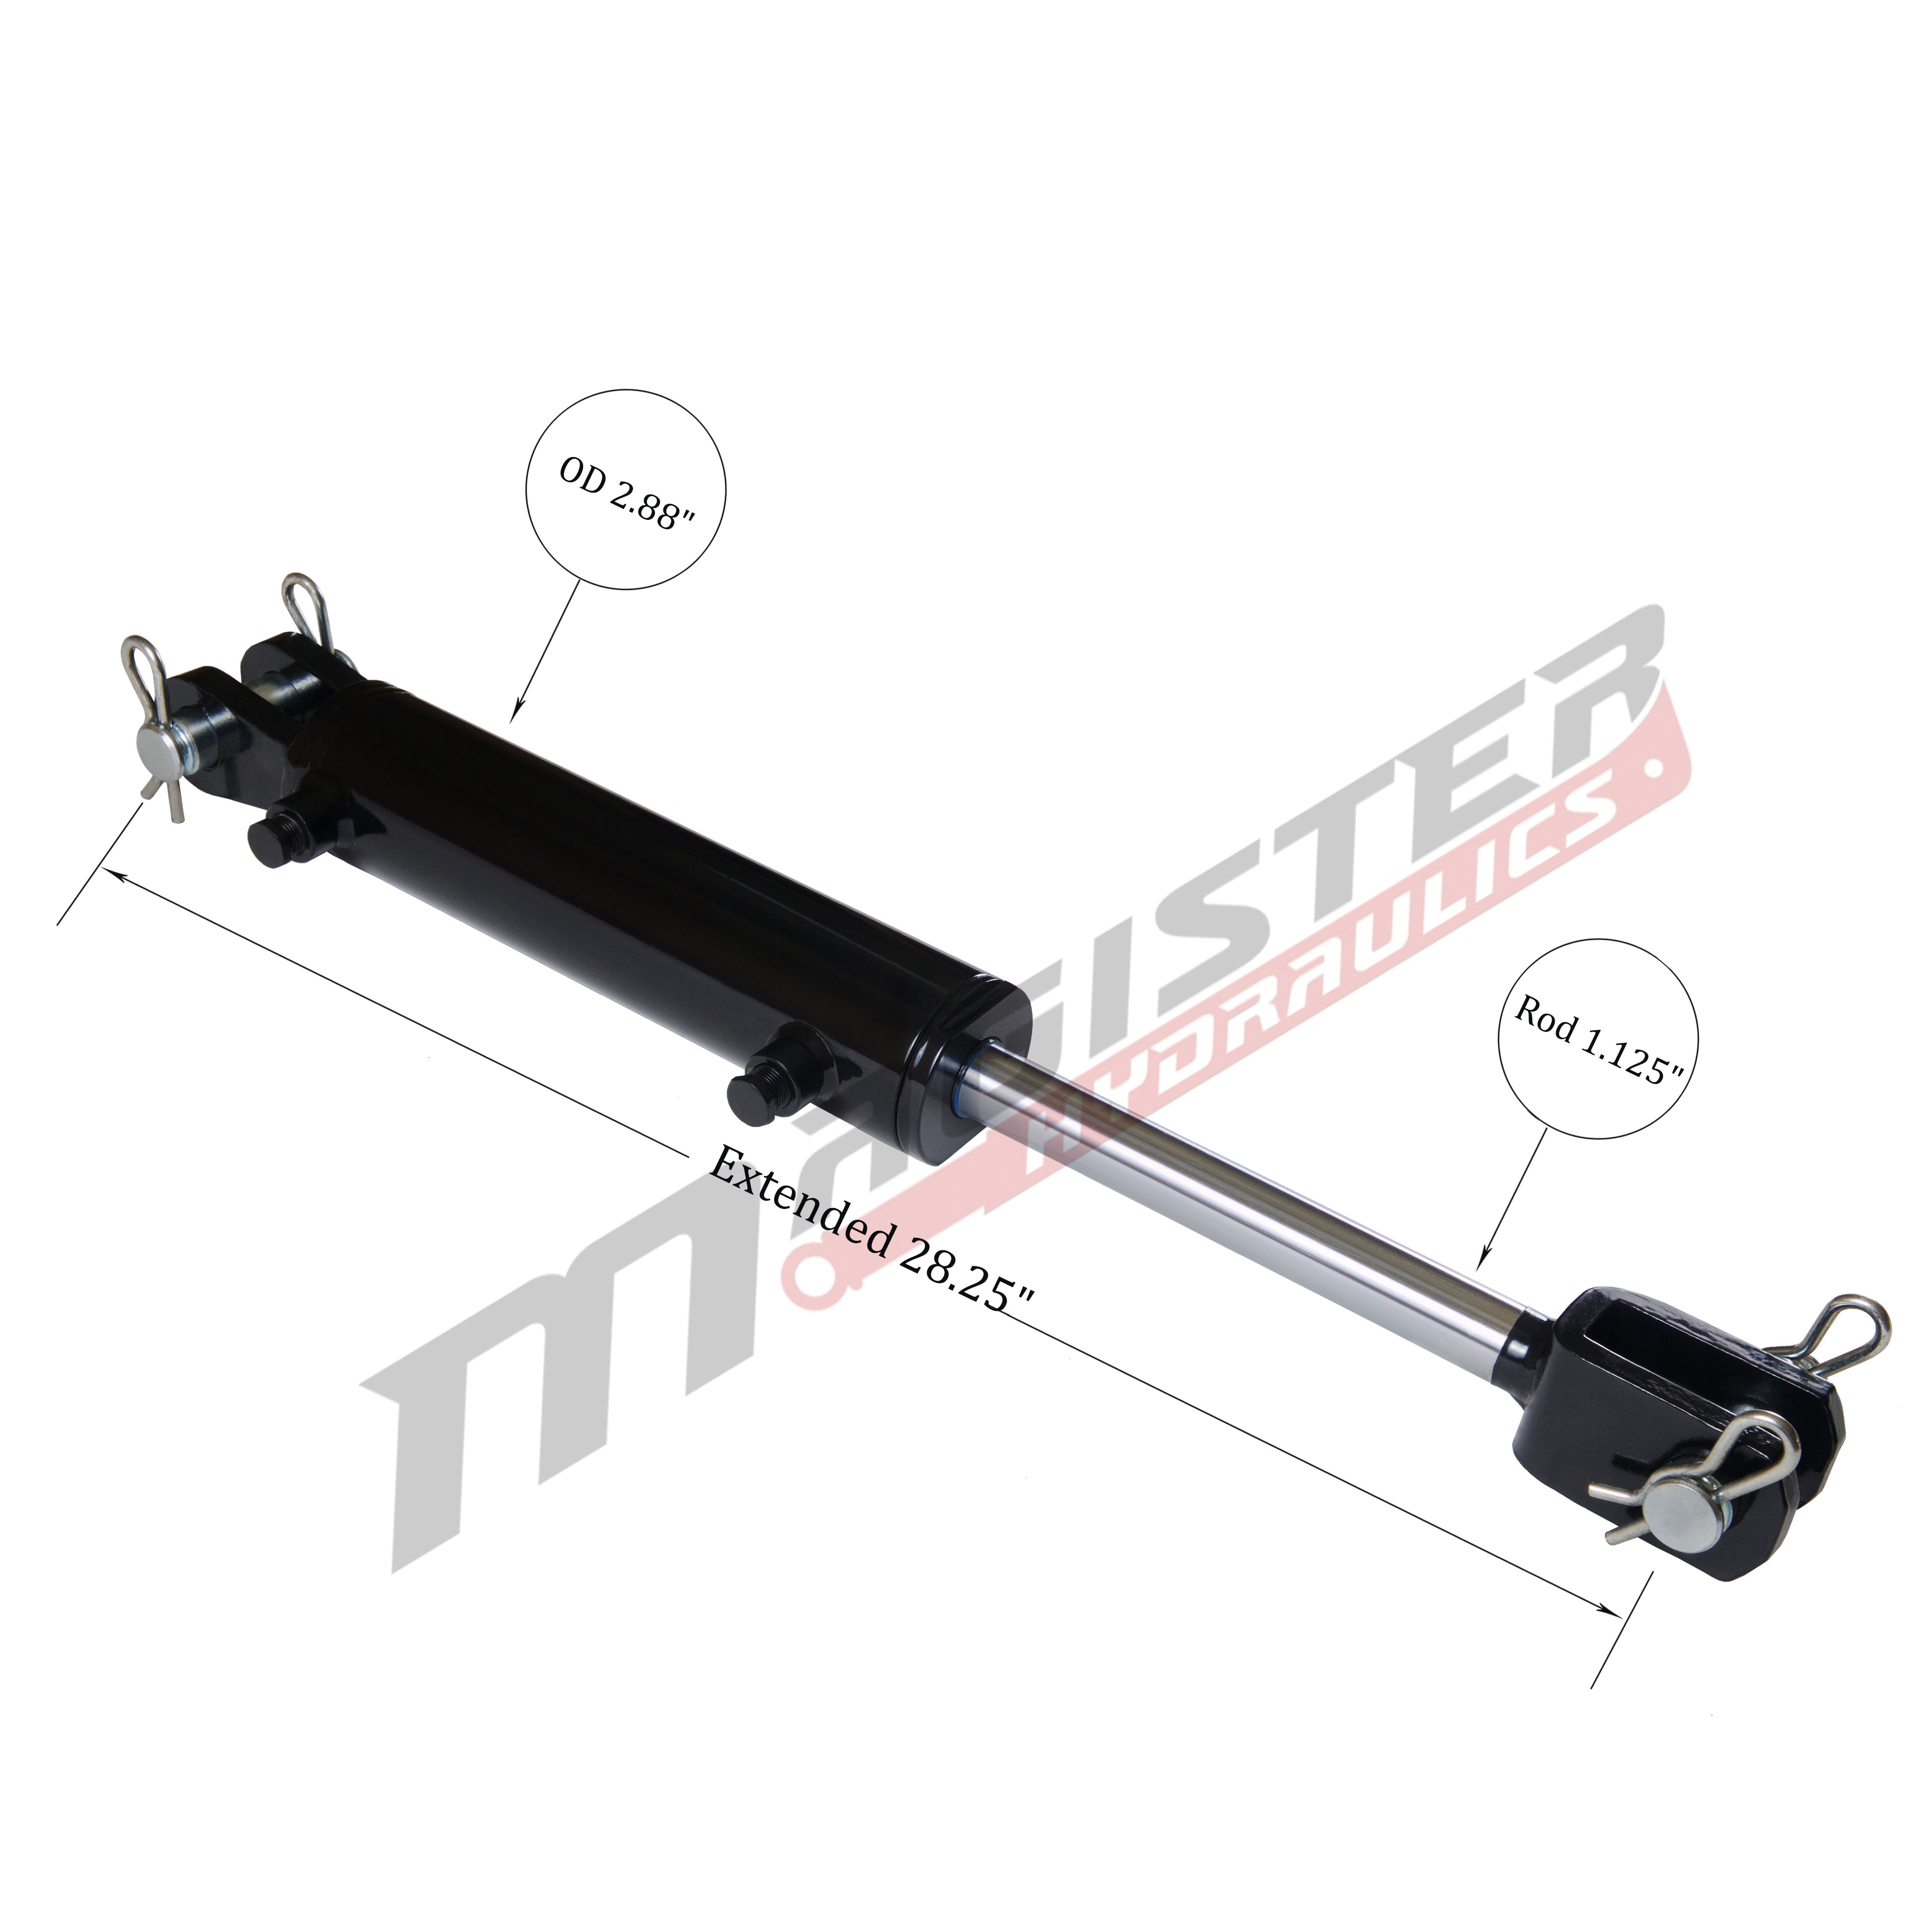 2.5 bore x 8 ASAE stroke hydraulic cylinder, ag clevis double acting cylinder | Magister Hydraulics